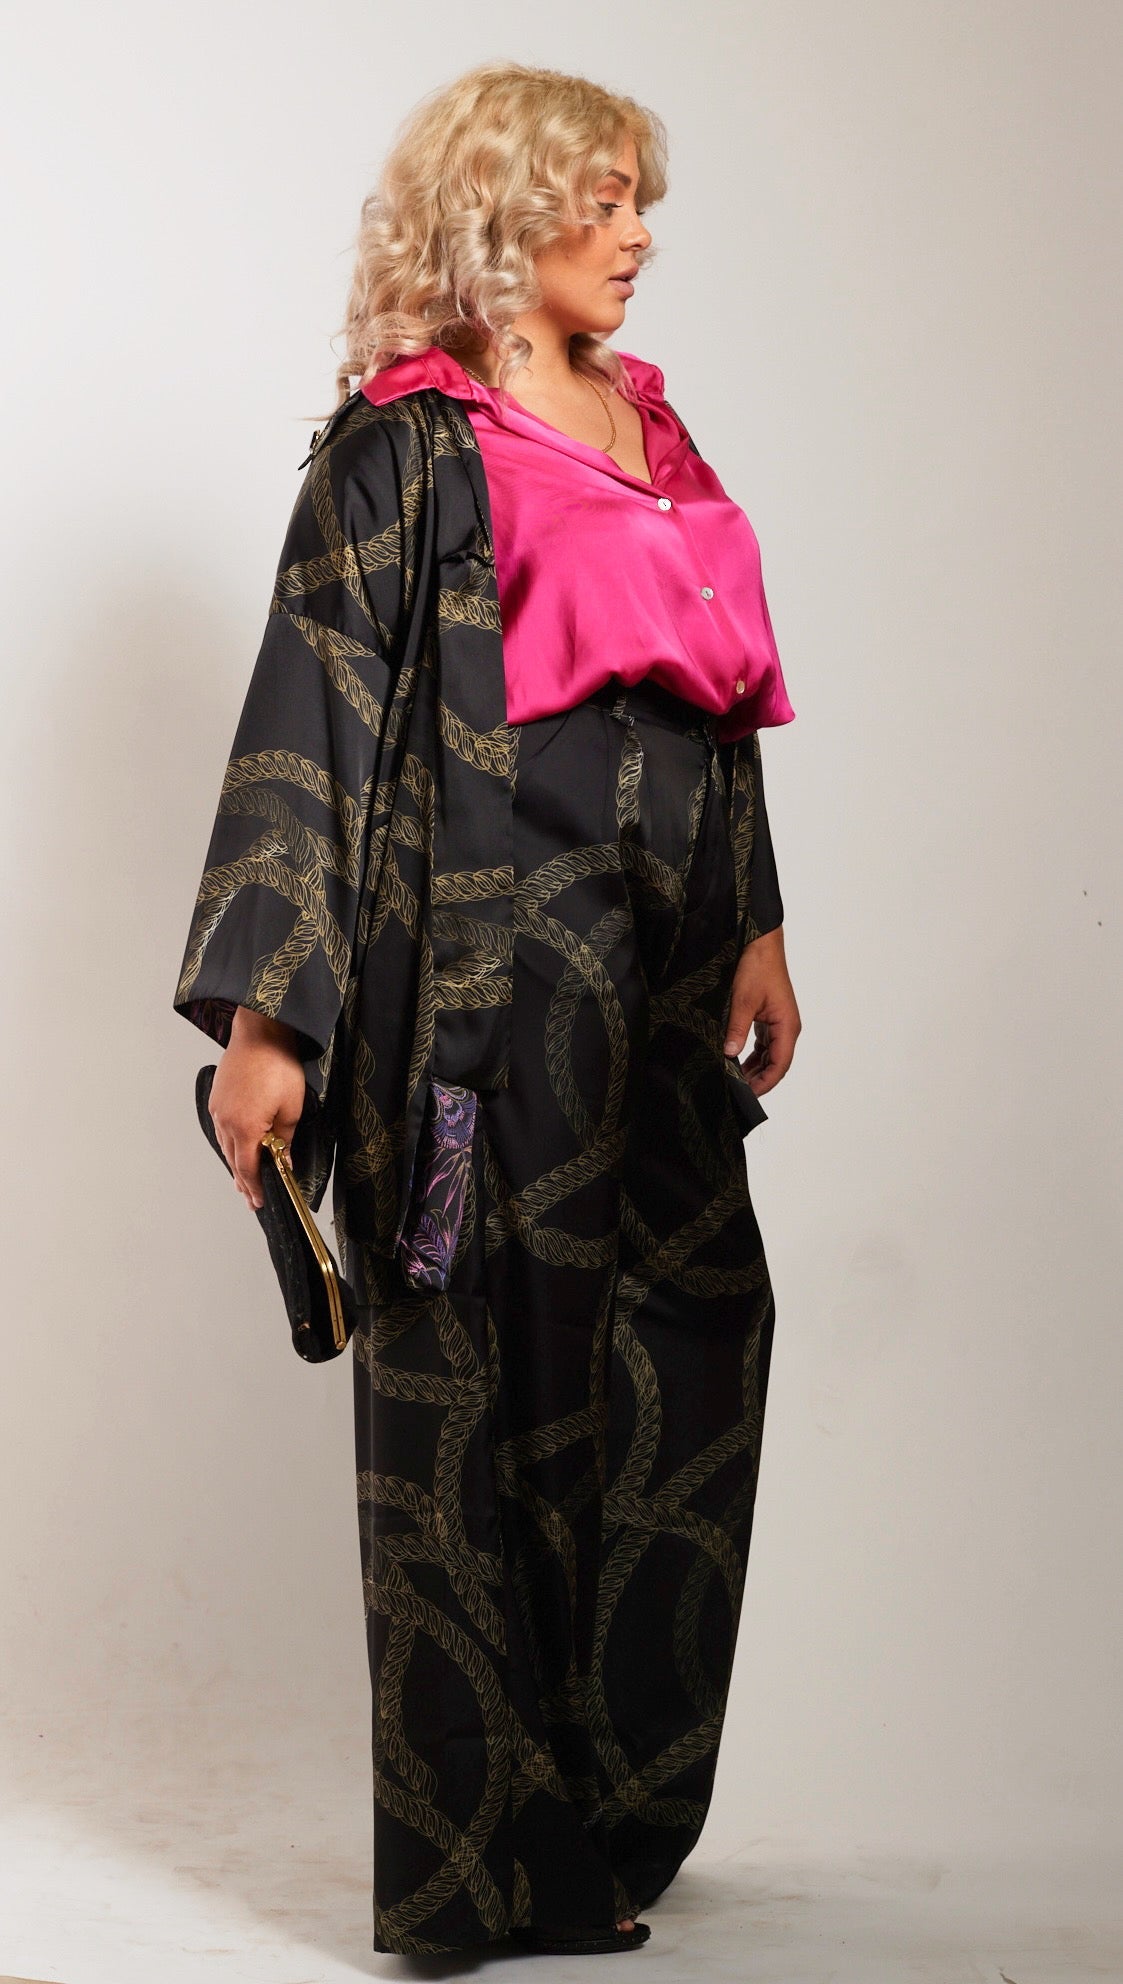 side profile of woman wearing black and gold chain printed kimono duster and yacht slacks and pink blouse 3